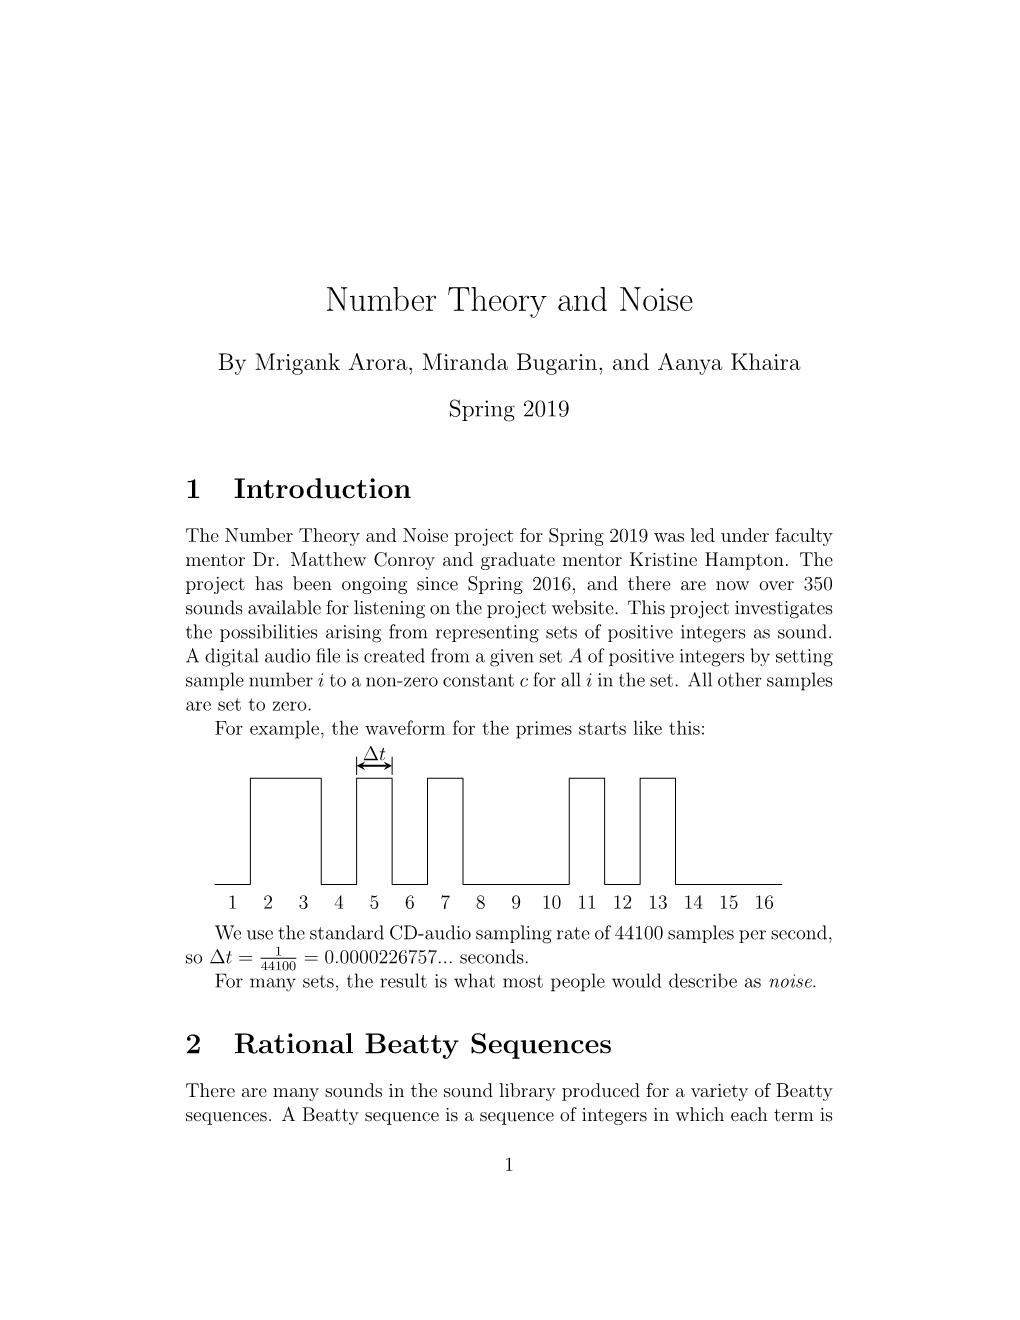 Number Theory and Noise